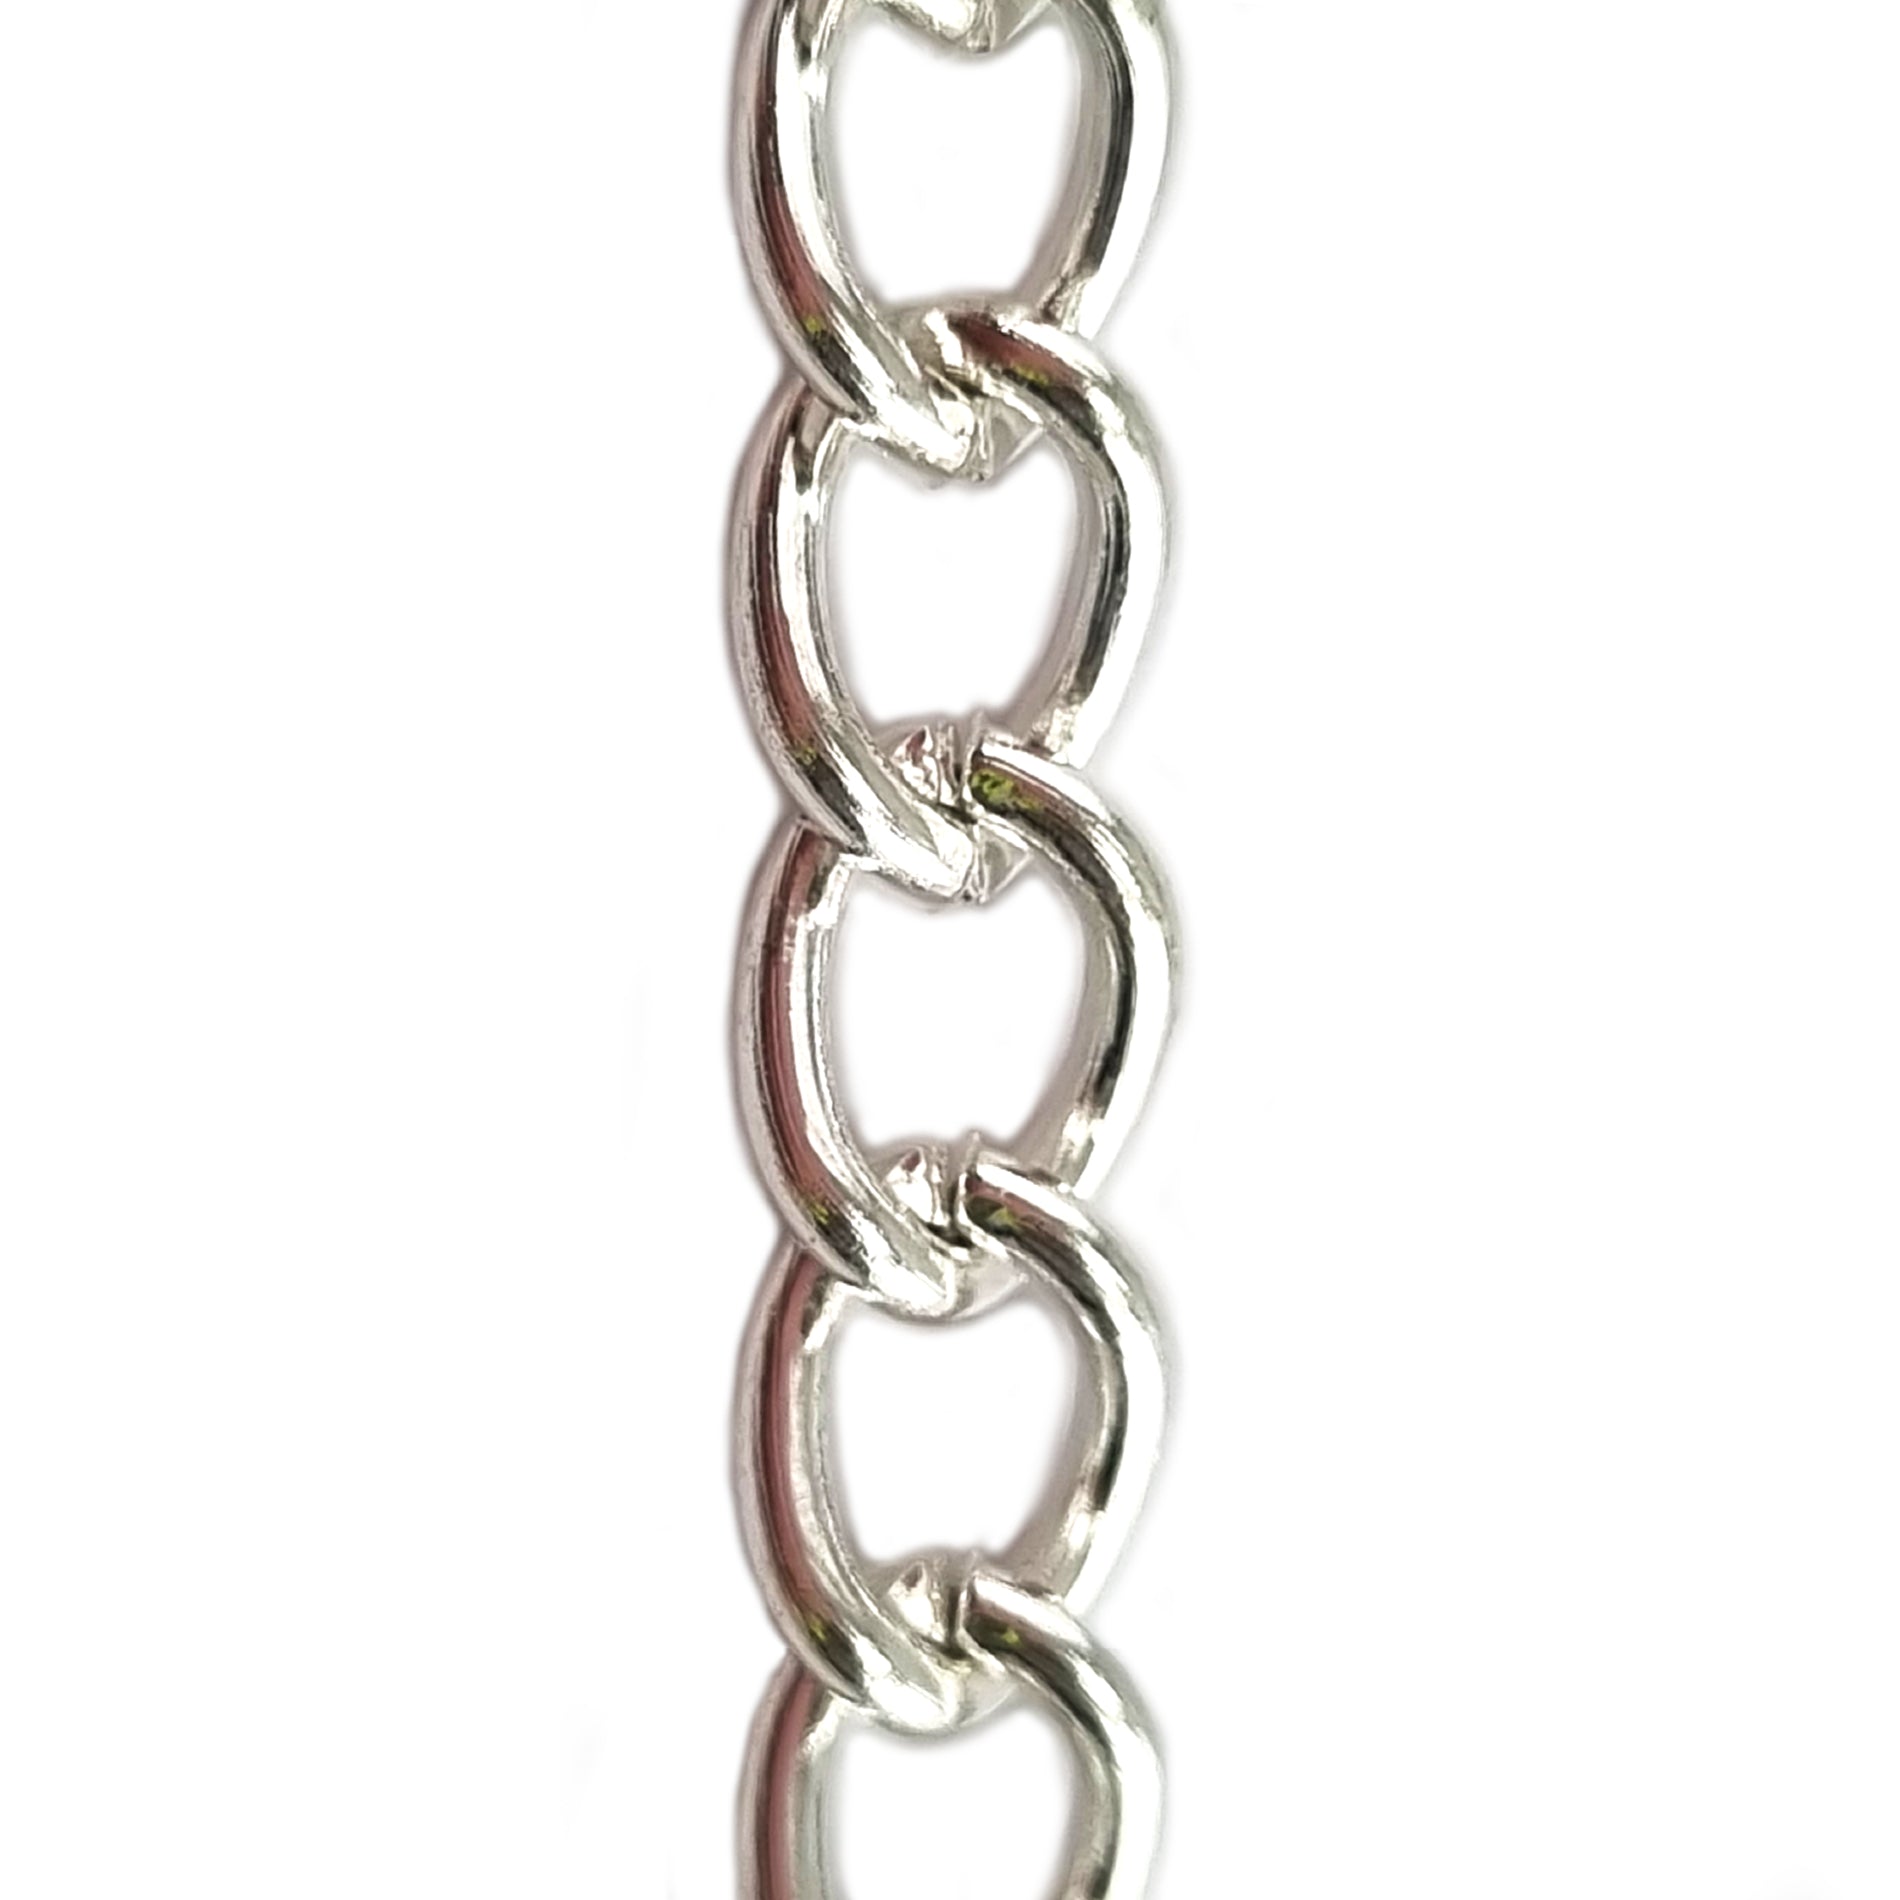 Silver Plated Oval Curb Chain. Available in various sizes. Shipping Australia wide & Melbourne click & collect. Shop Jewellery Chain online chain.com.au